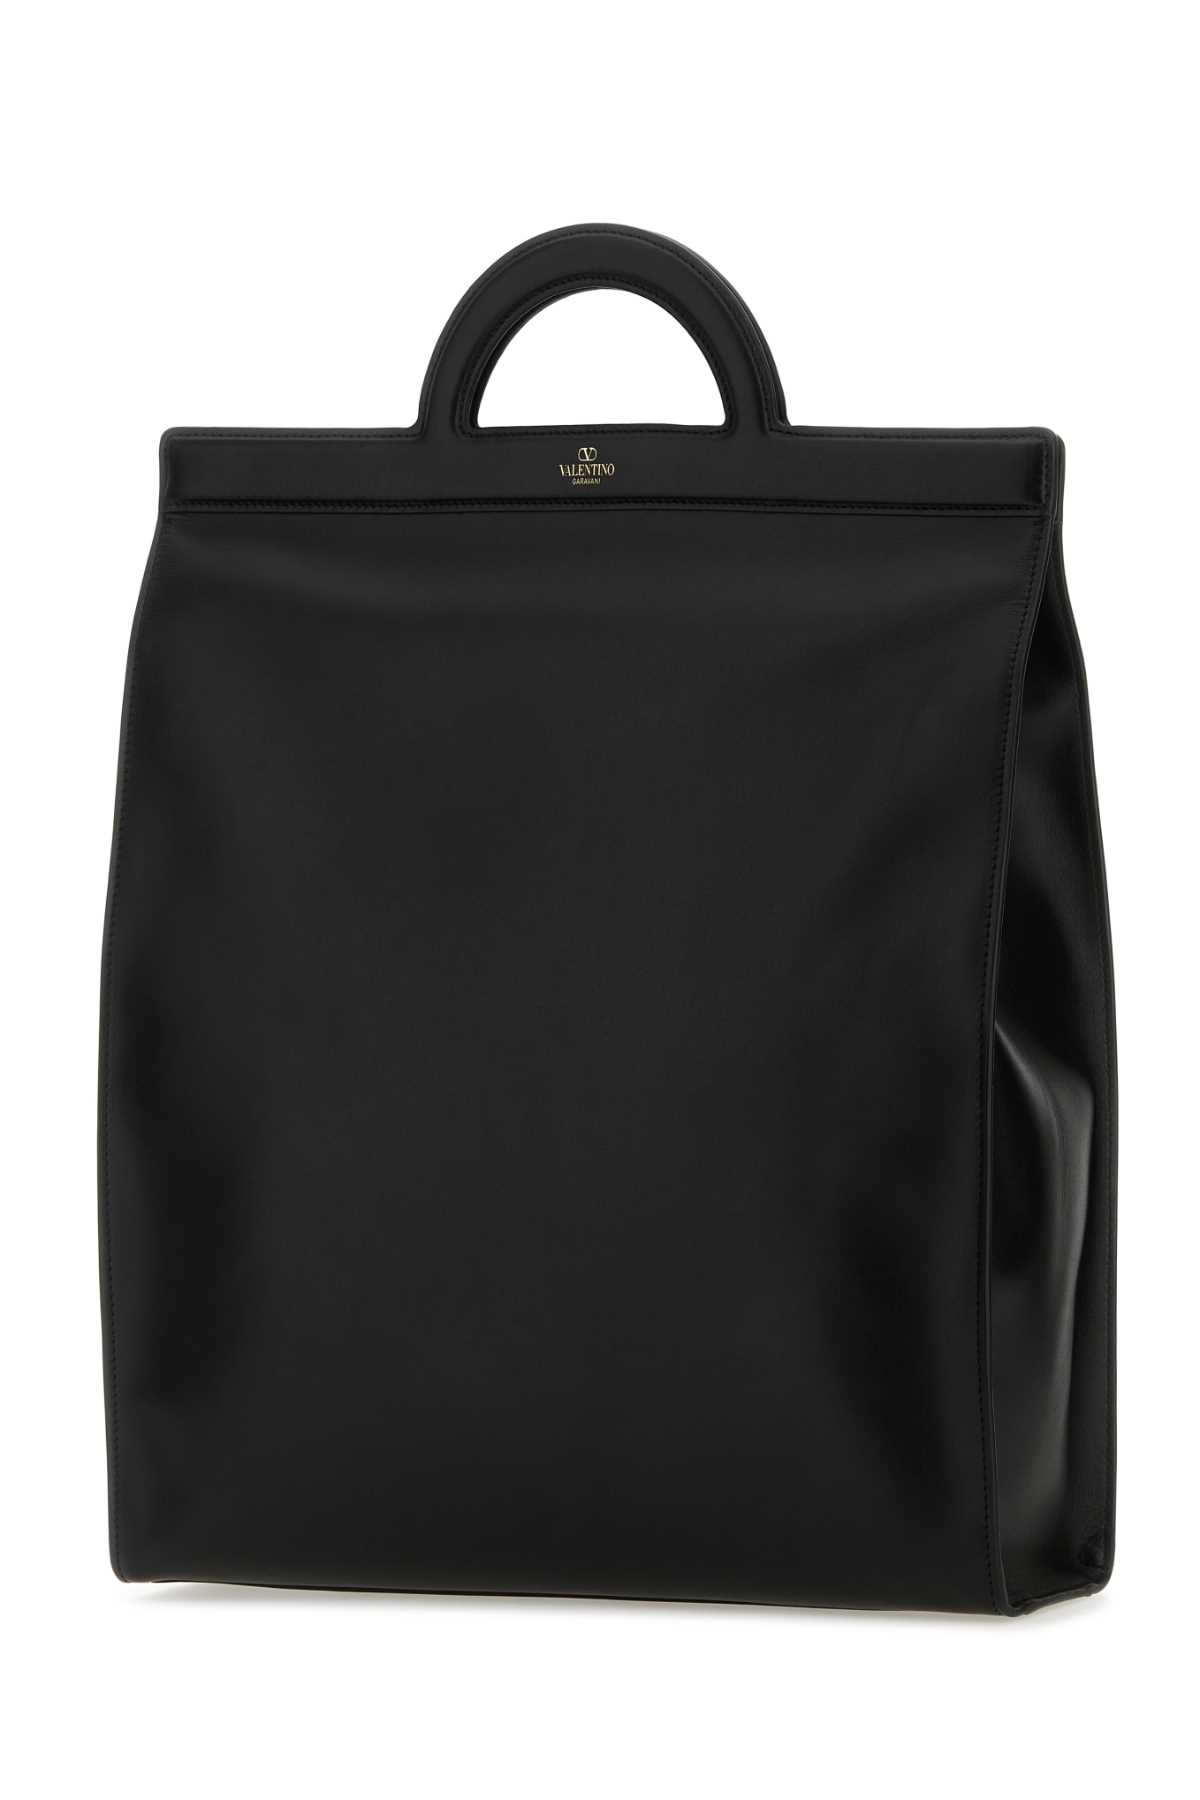 Shop Valentino Black Leather Shopping Bag In Nero